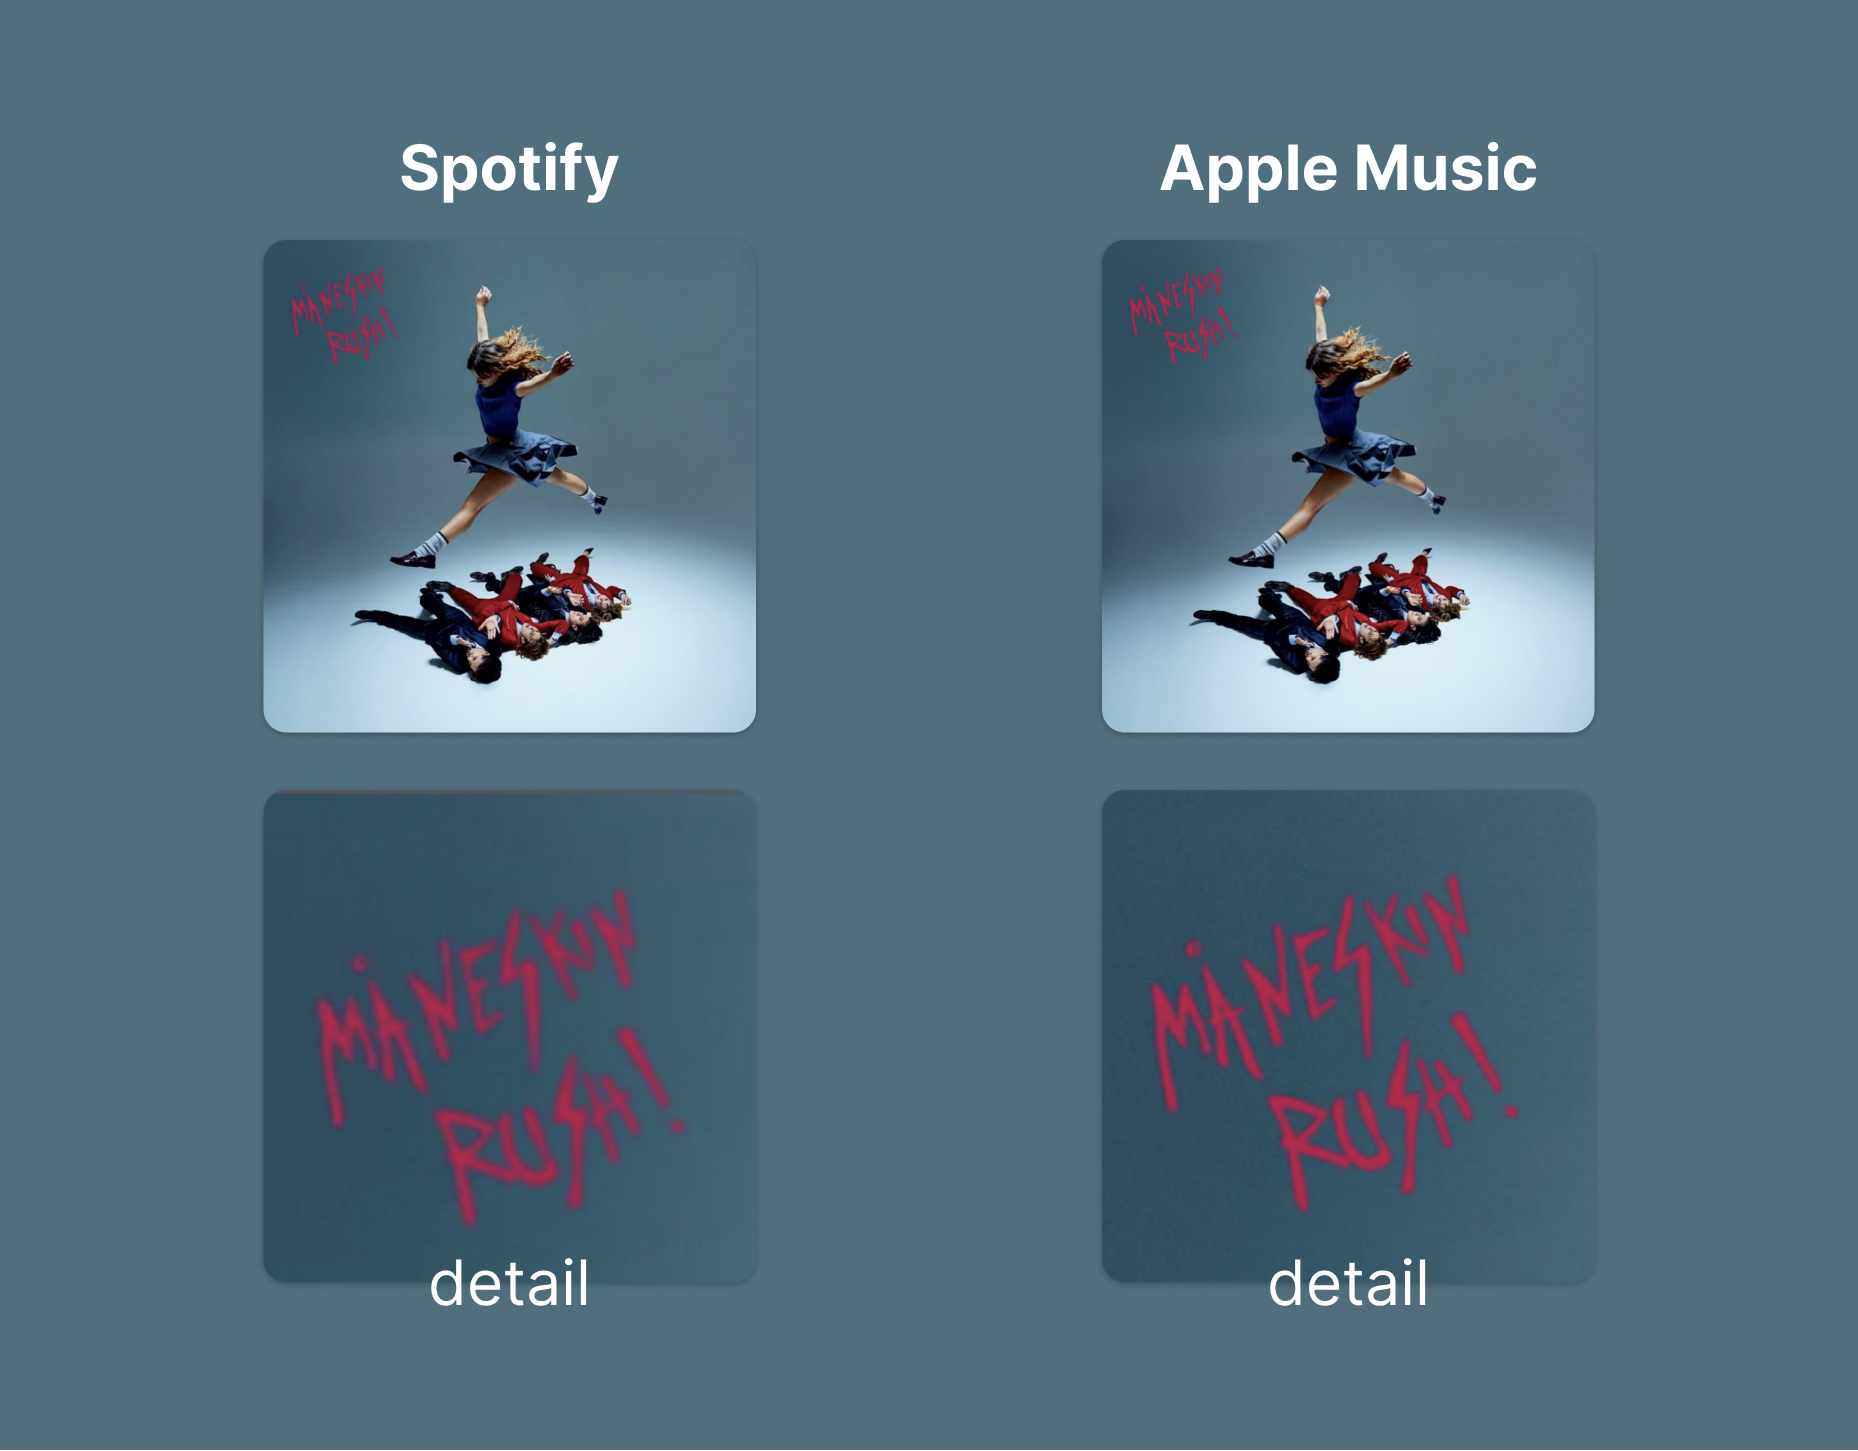 The same album-art twice. The Spotify image shows obvious JPEG-artifacts: the lines are a bit blurry and the colors less sharp.